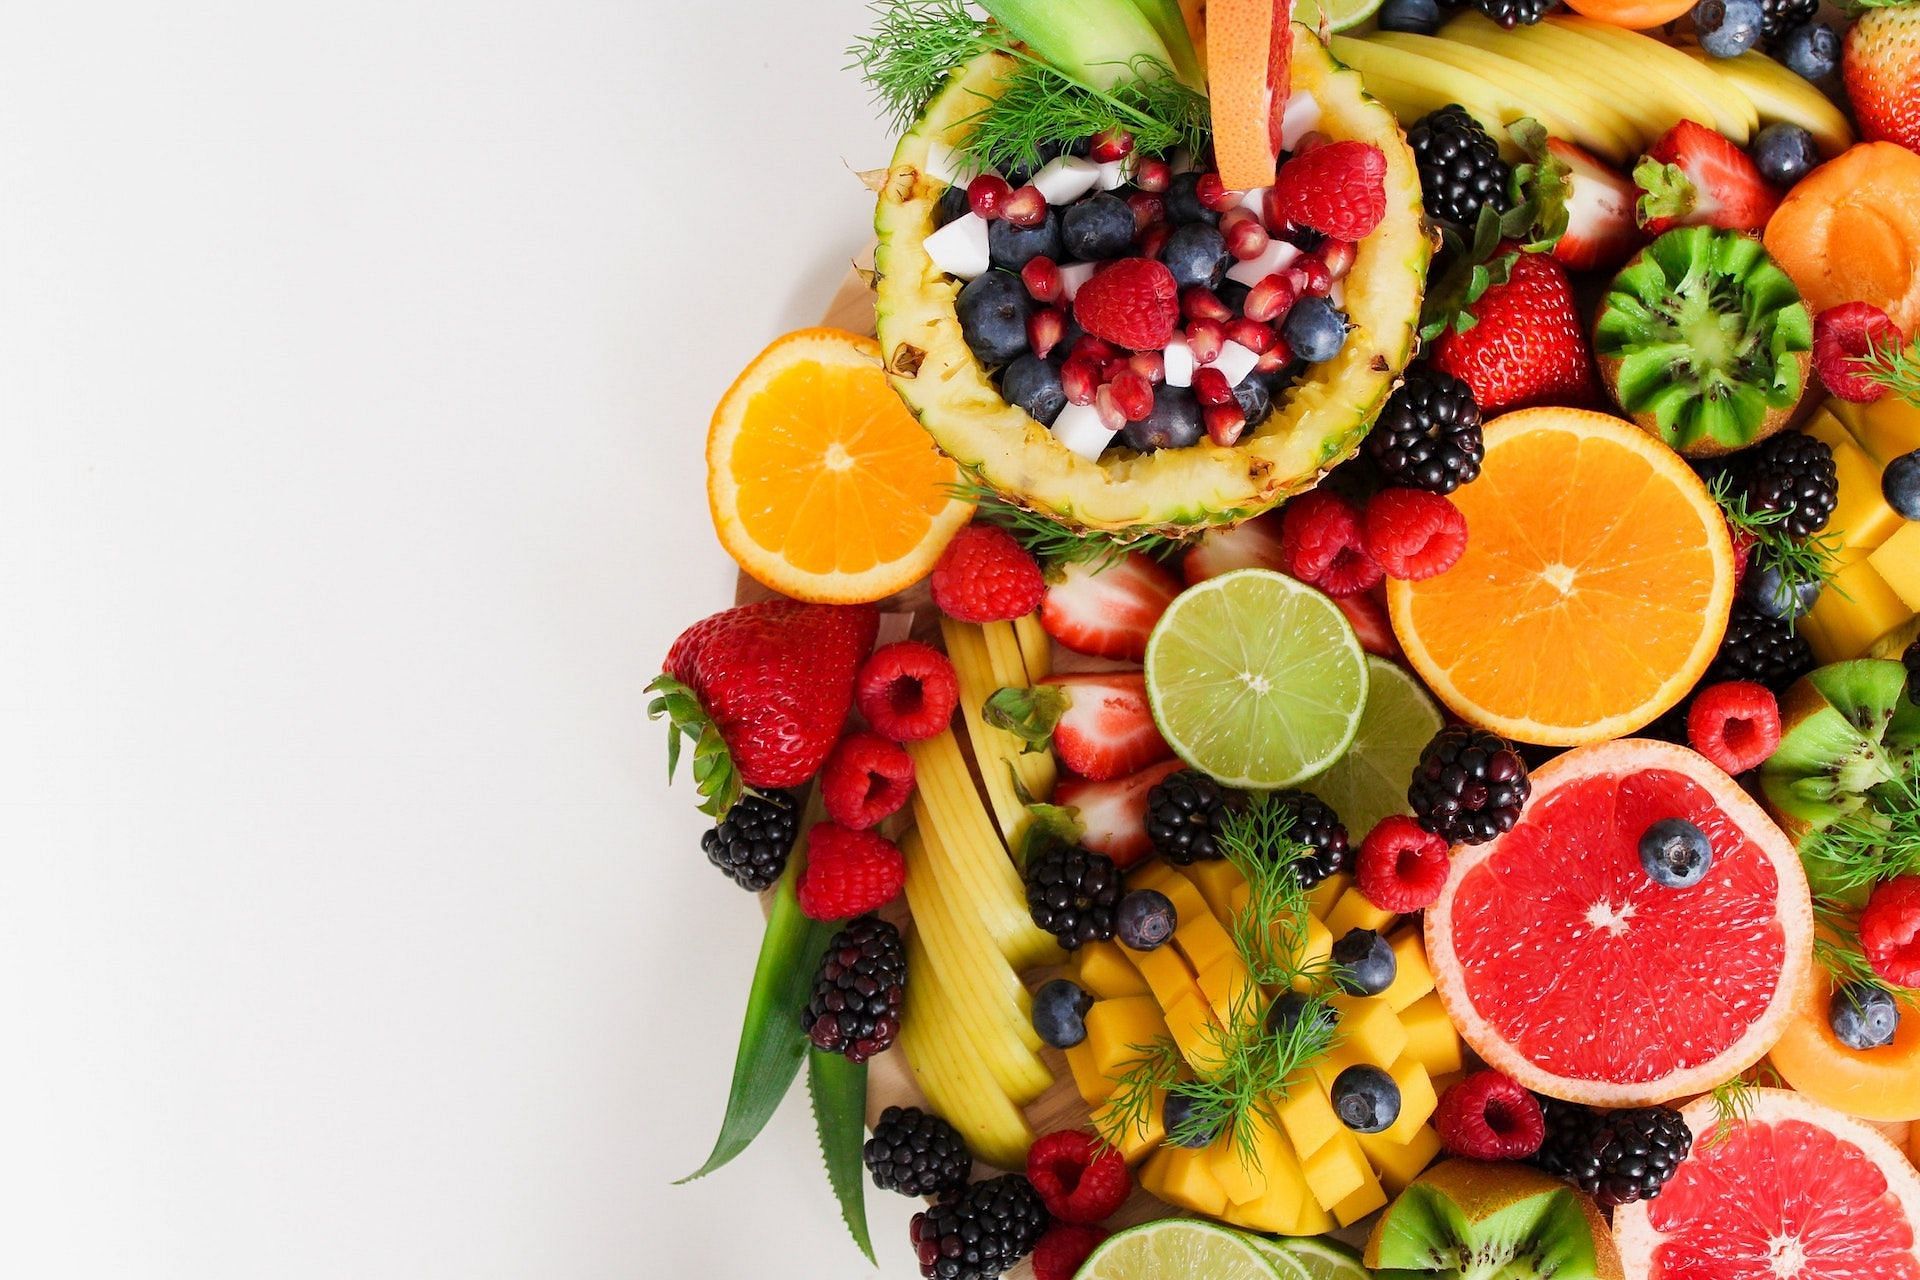 Low calorie fruits are good for weight loss. (Photo via Pexels/Jane Doan)